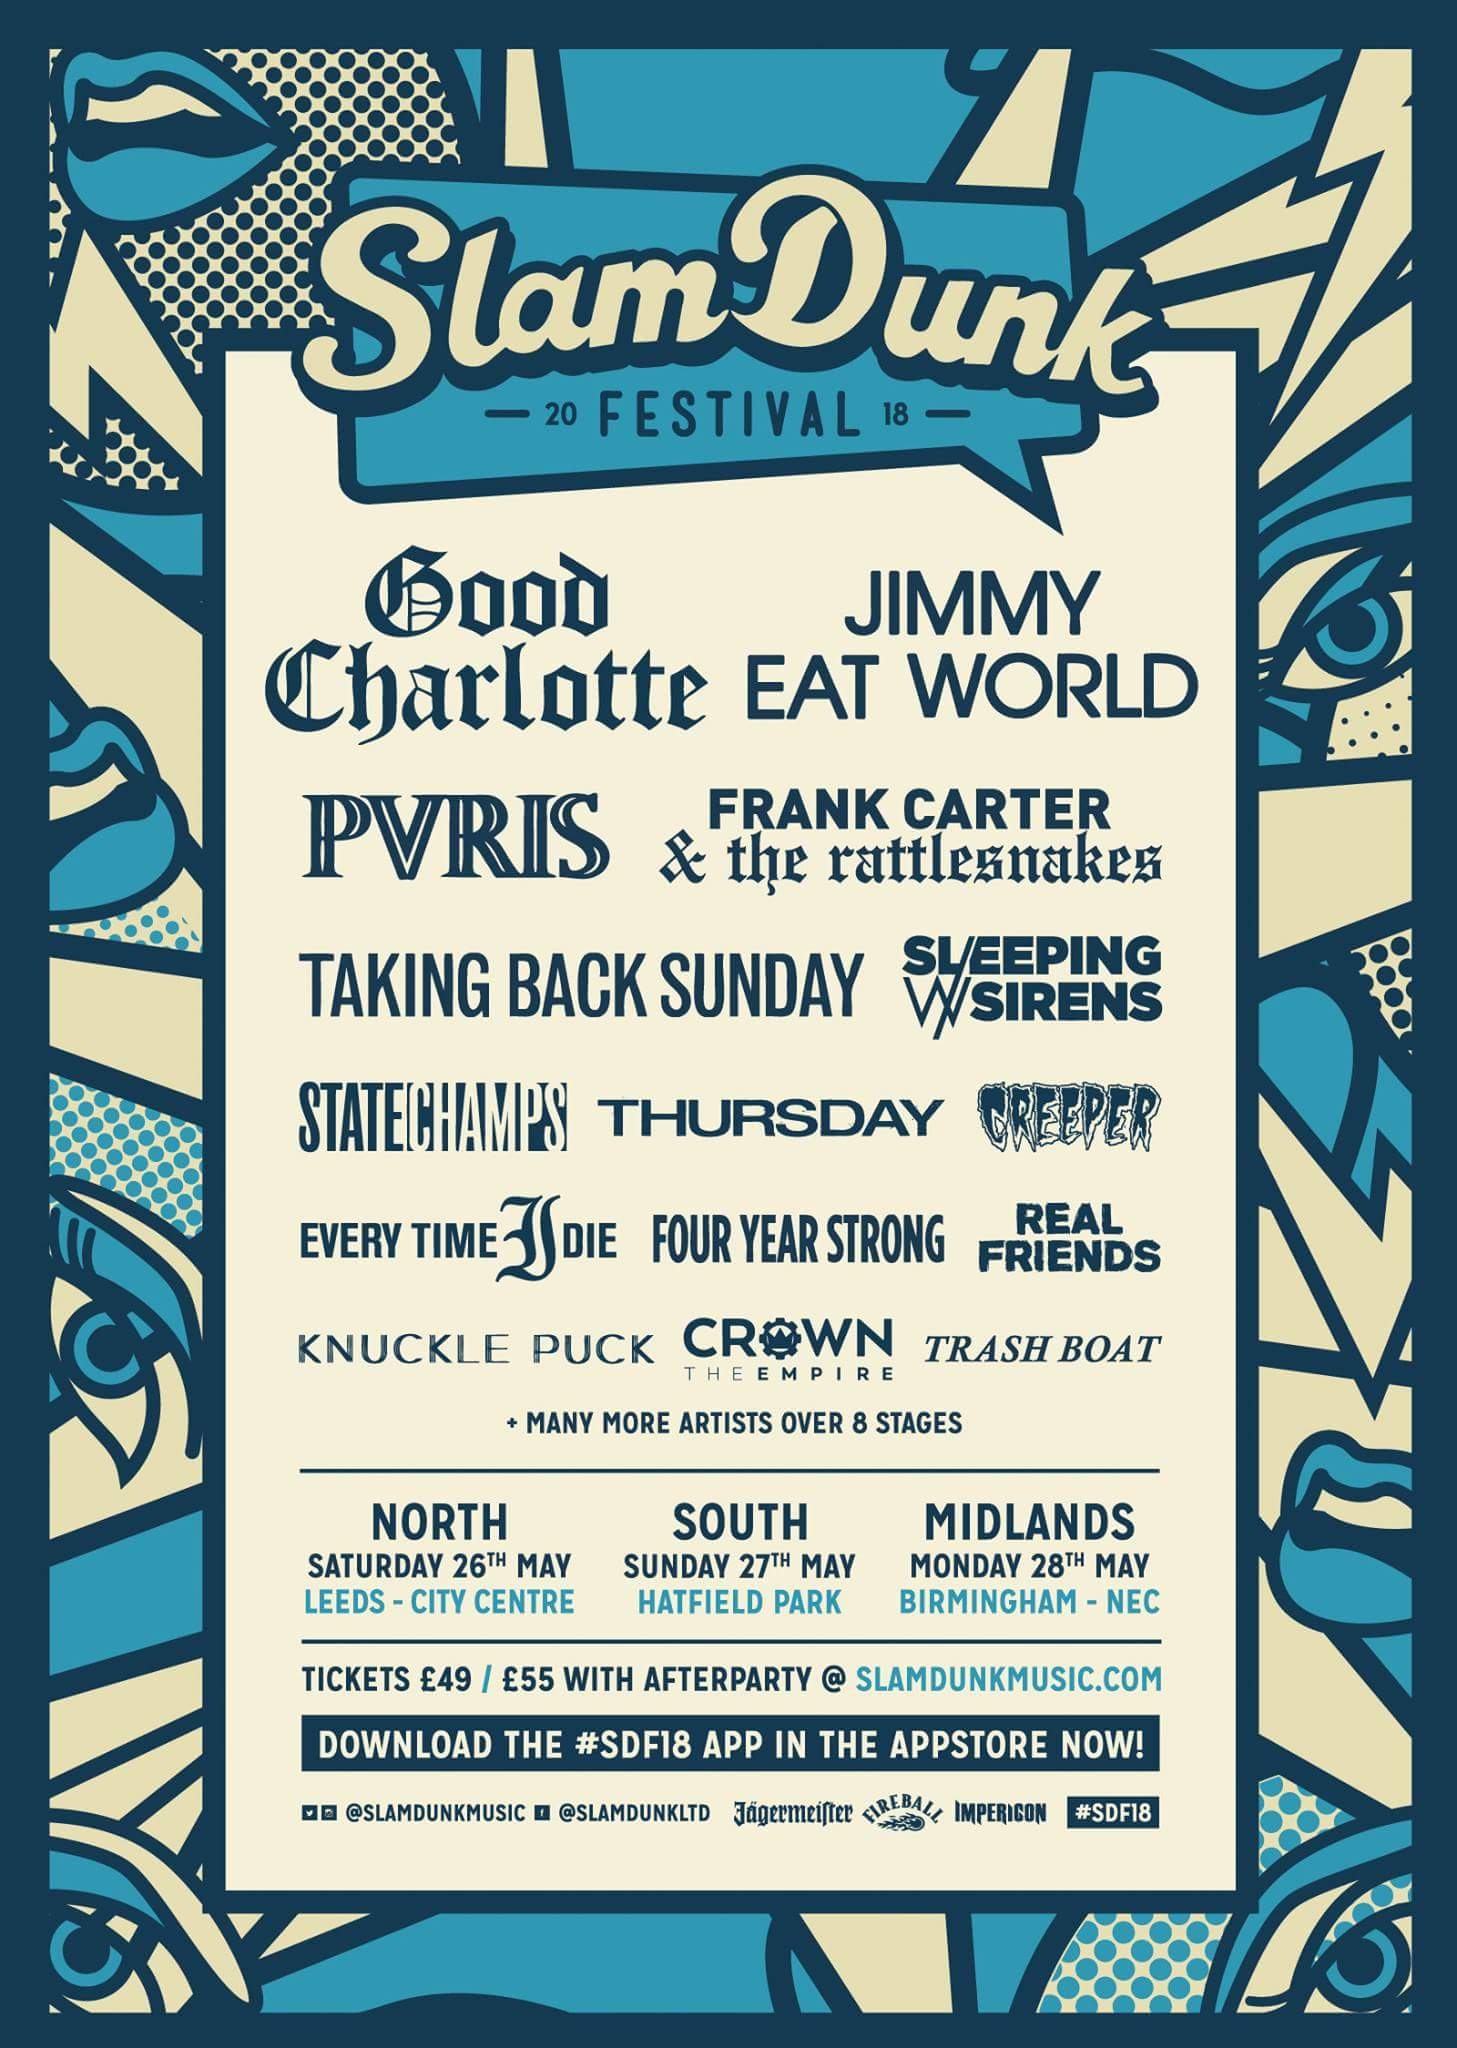 The current line-up for the 2018 Slam Dunk Festival